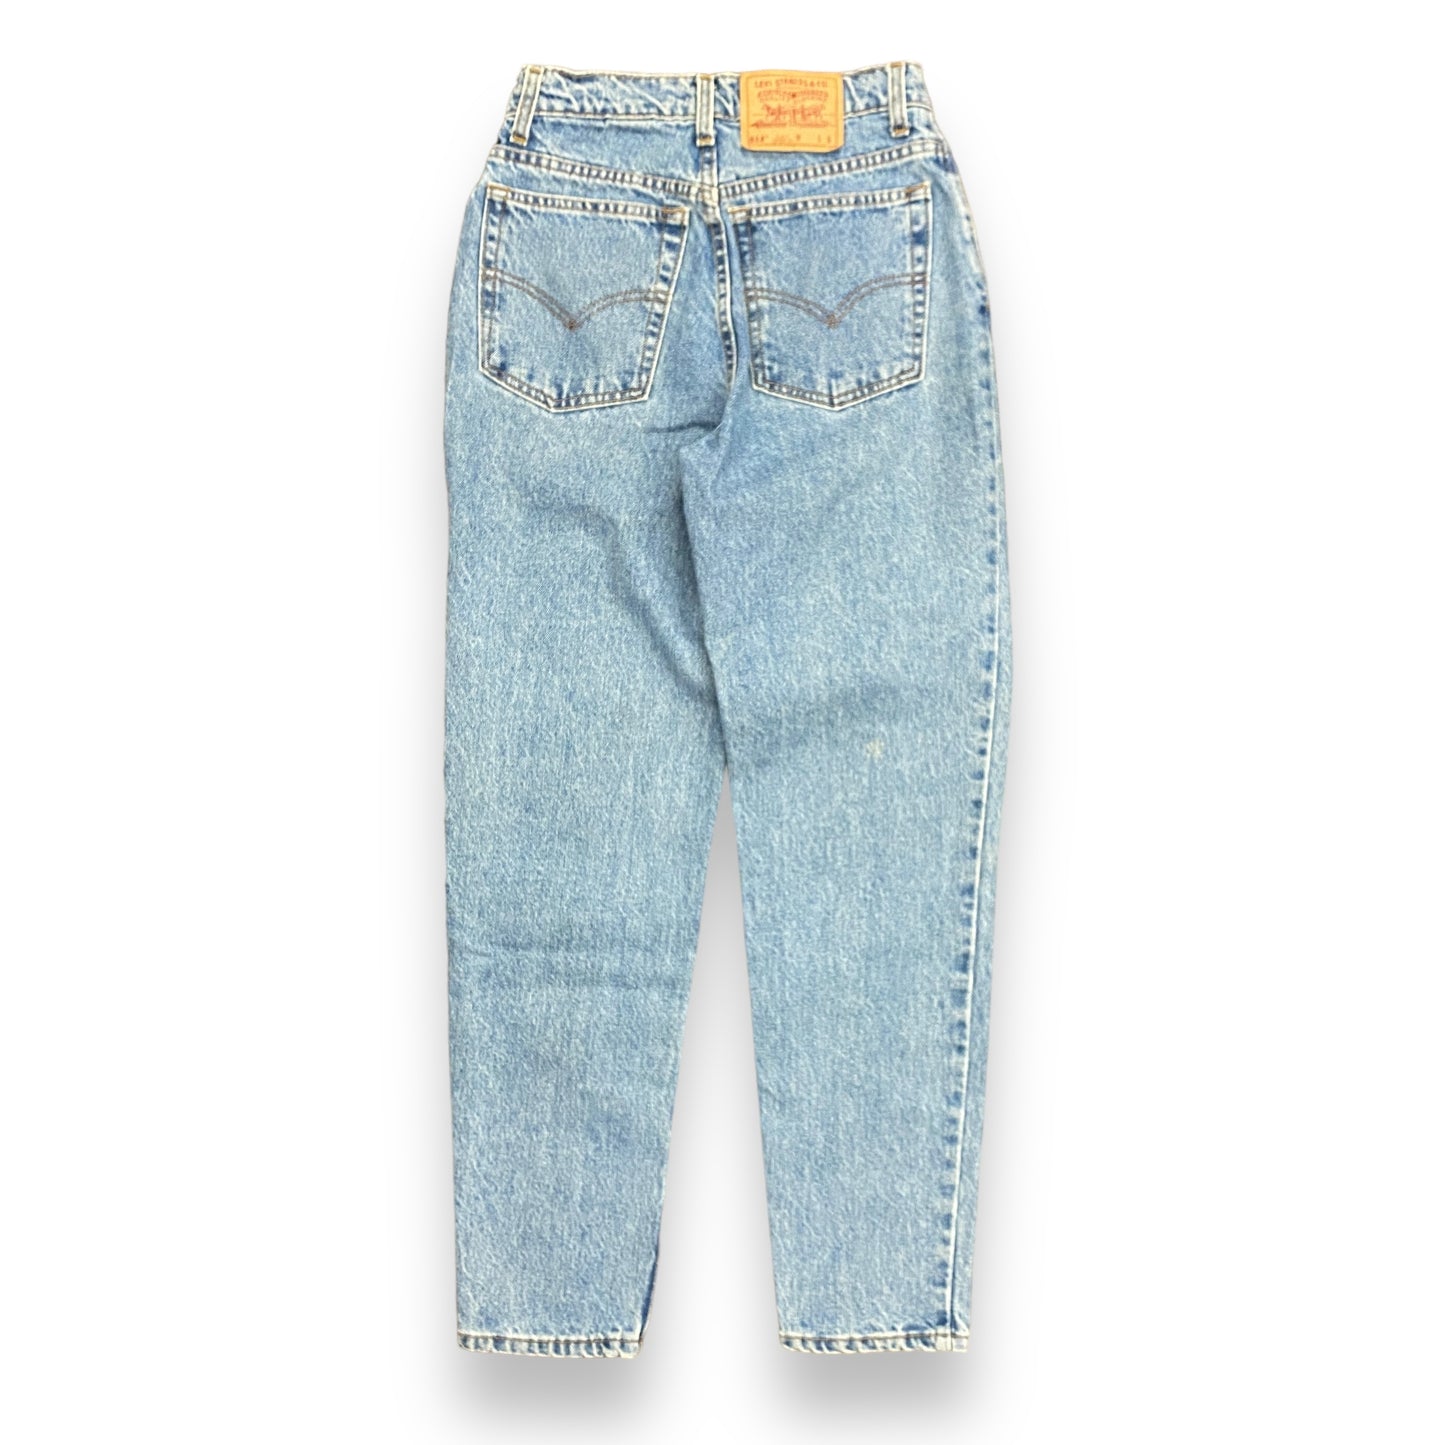 90s Levi's 512 Tapered Jeans - 27"x28"